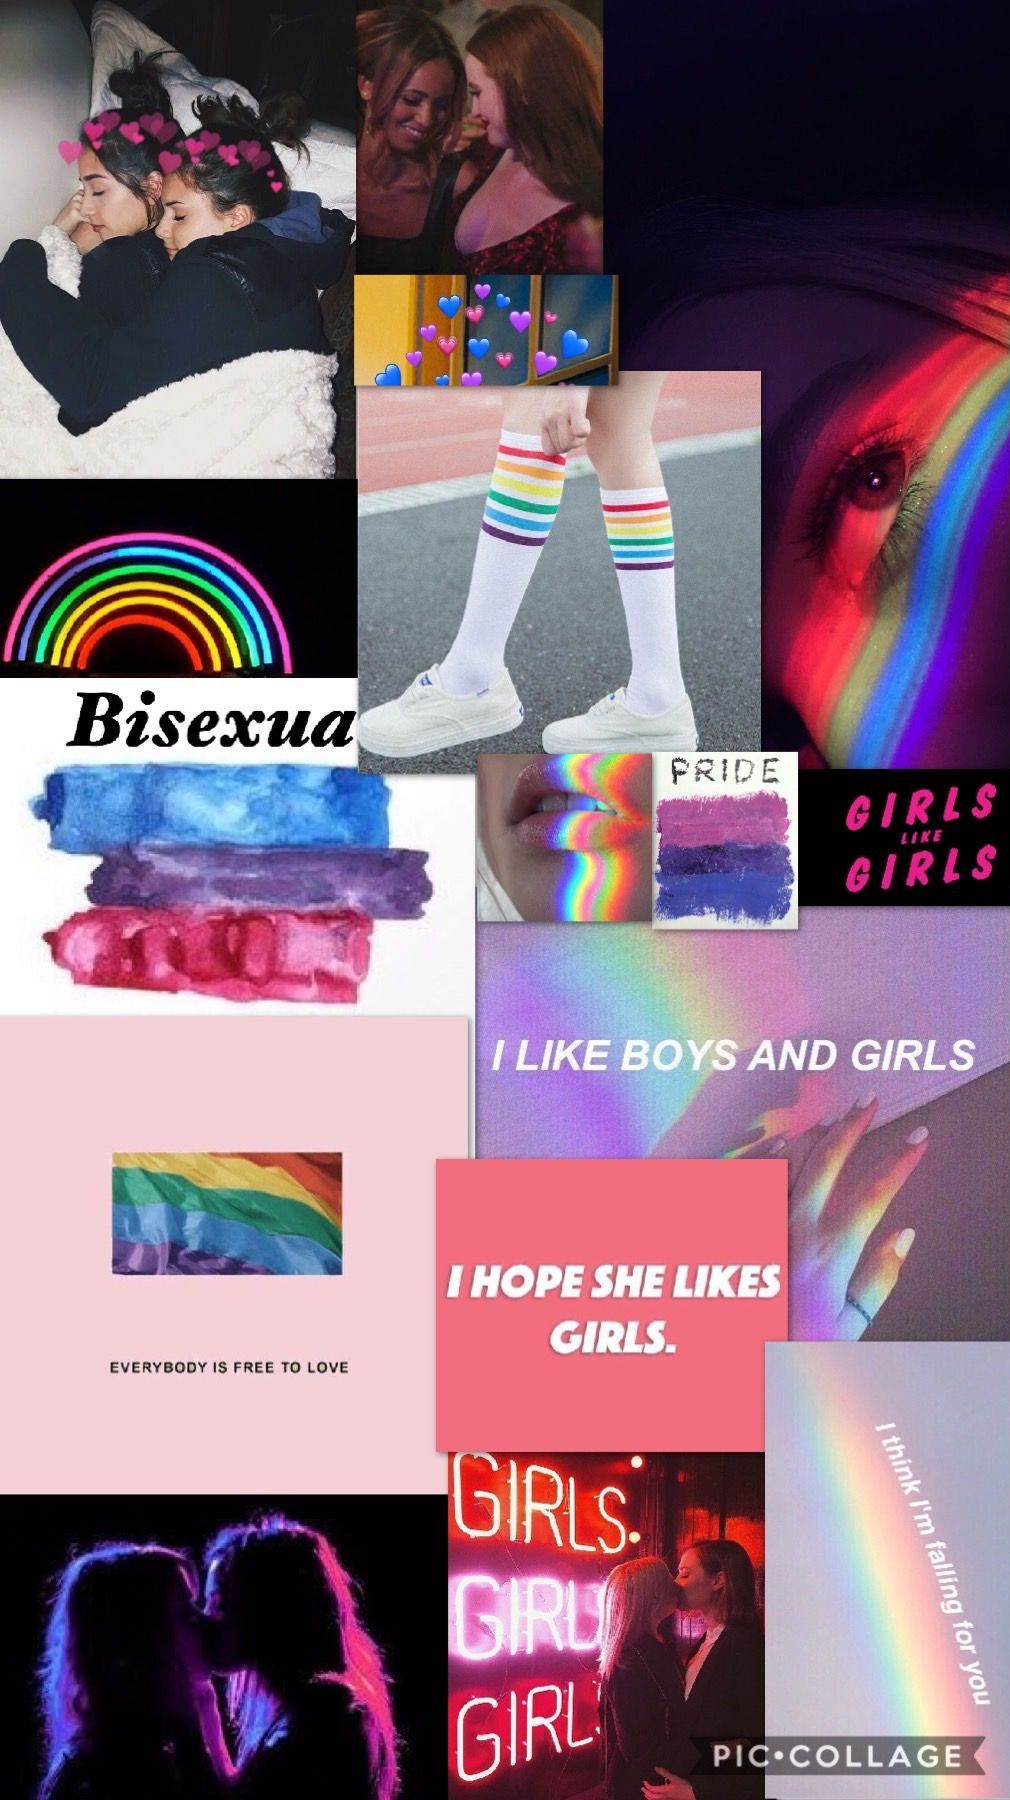 A collage of images and text celebrating bisexuality, including images of rainbows and the text 